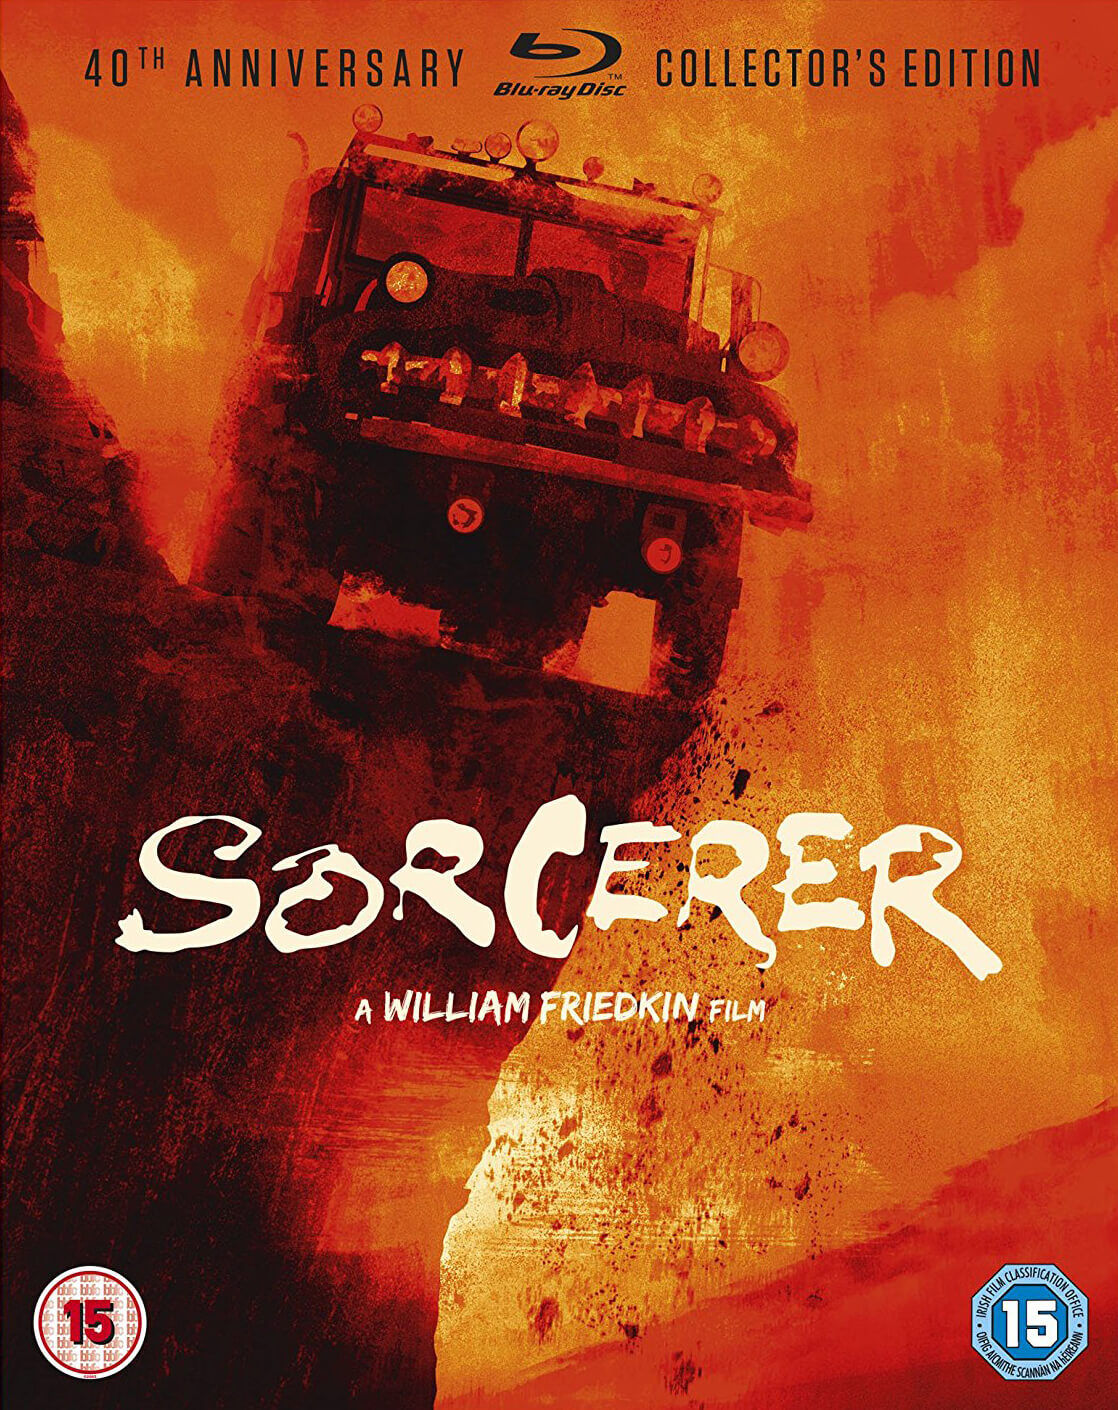 Sorcerer (40th Anniversary Collector's Edition)